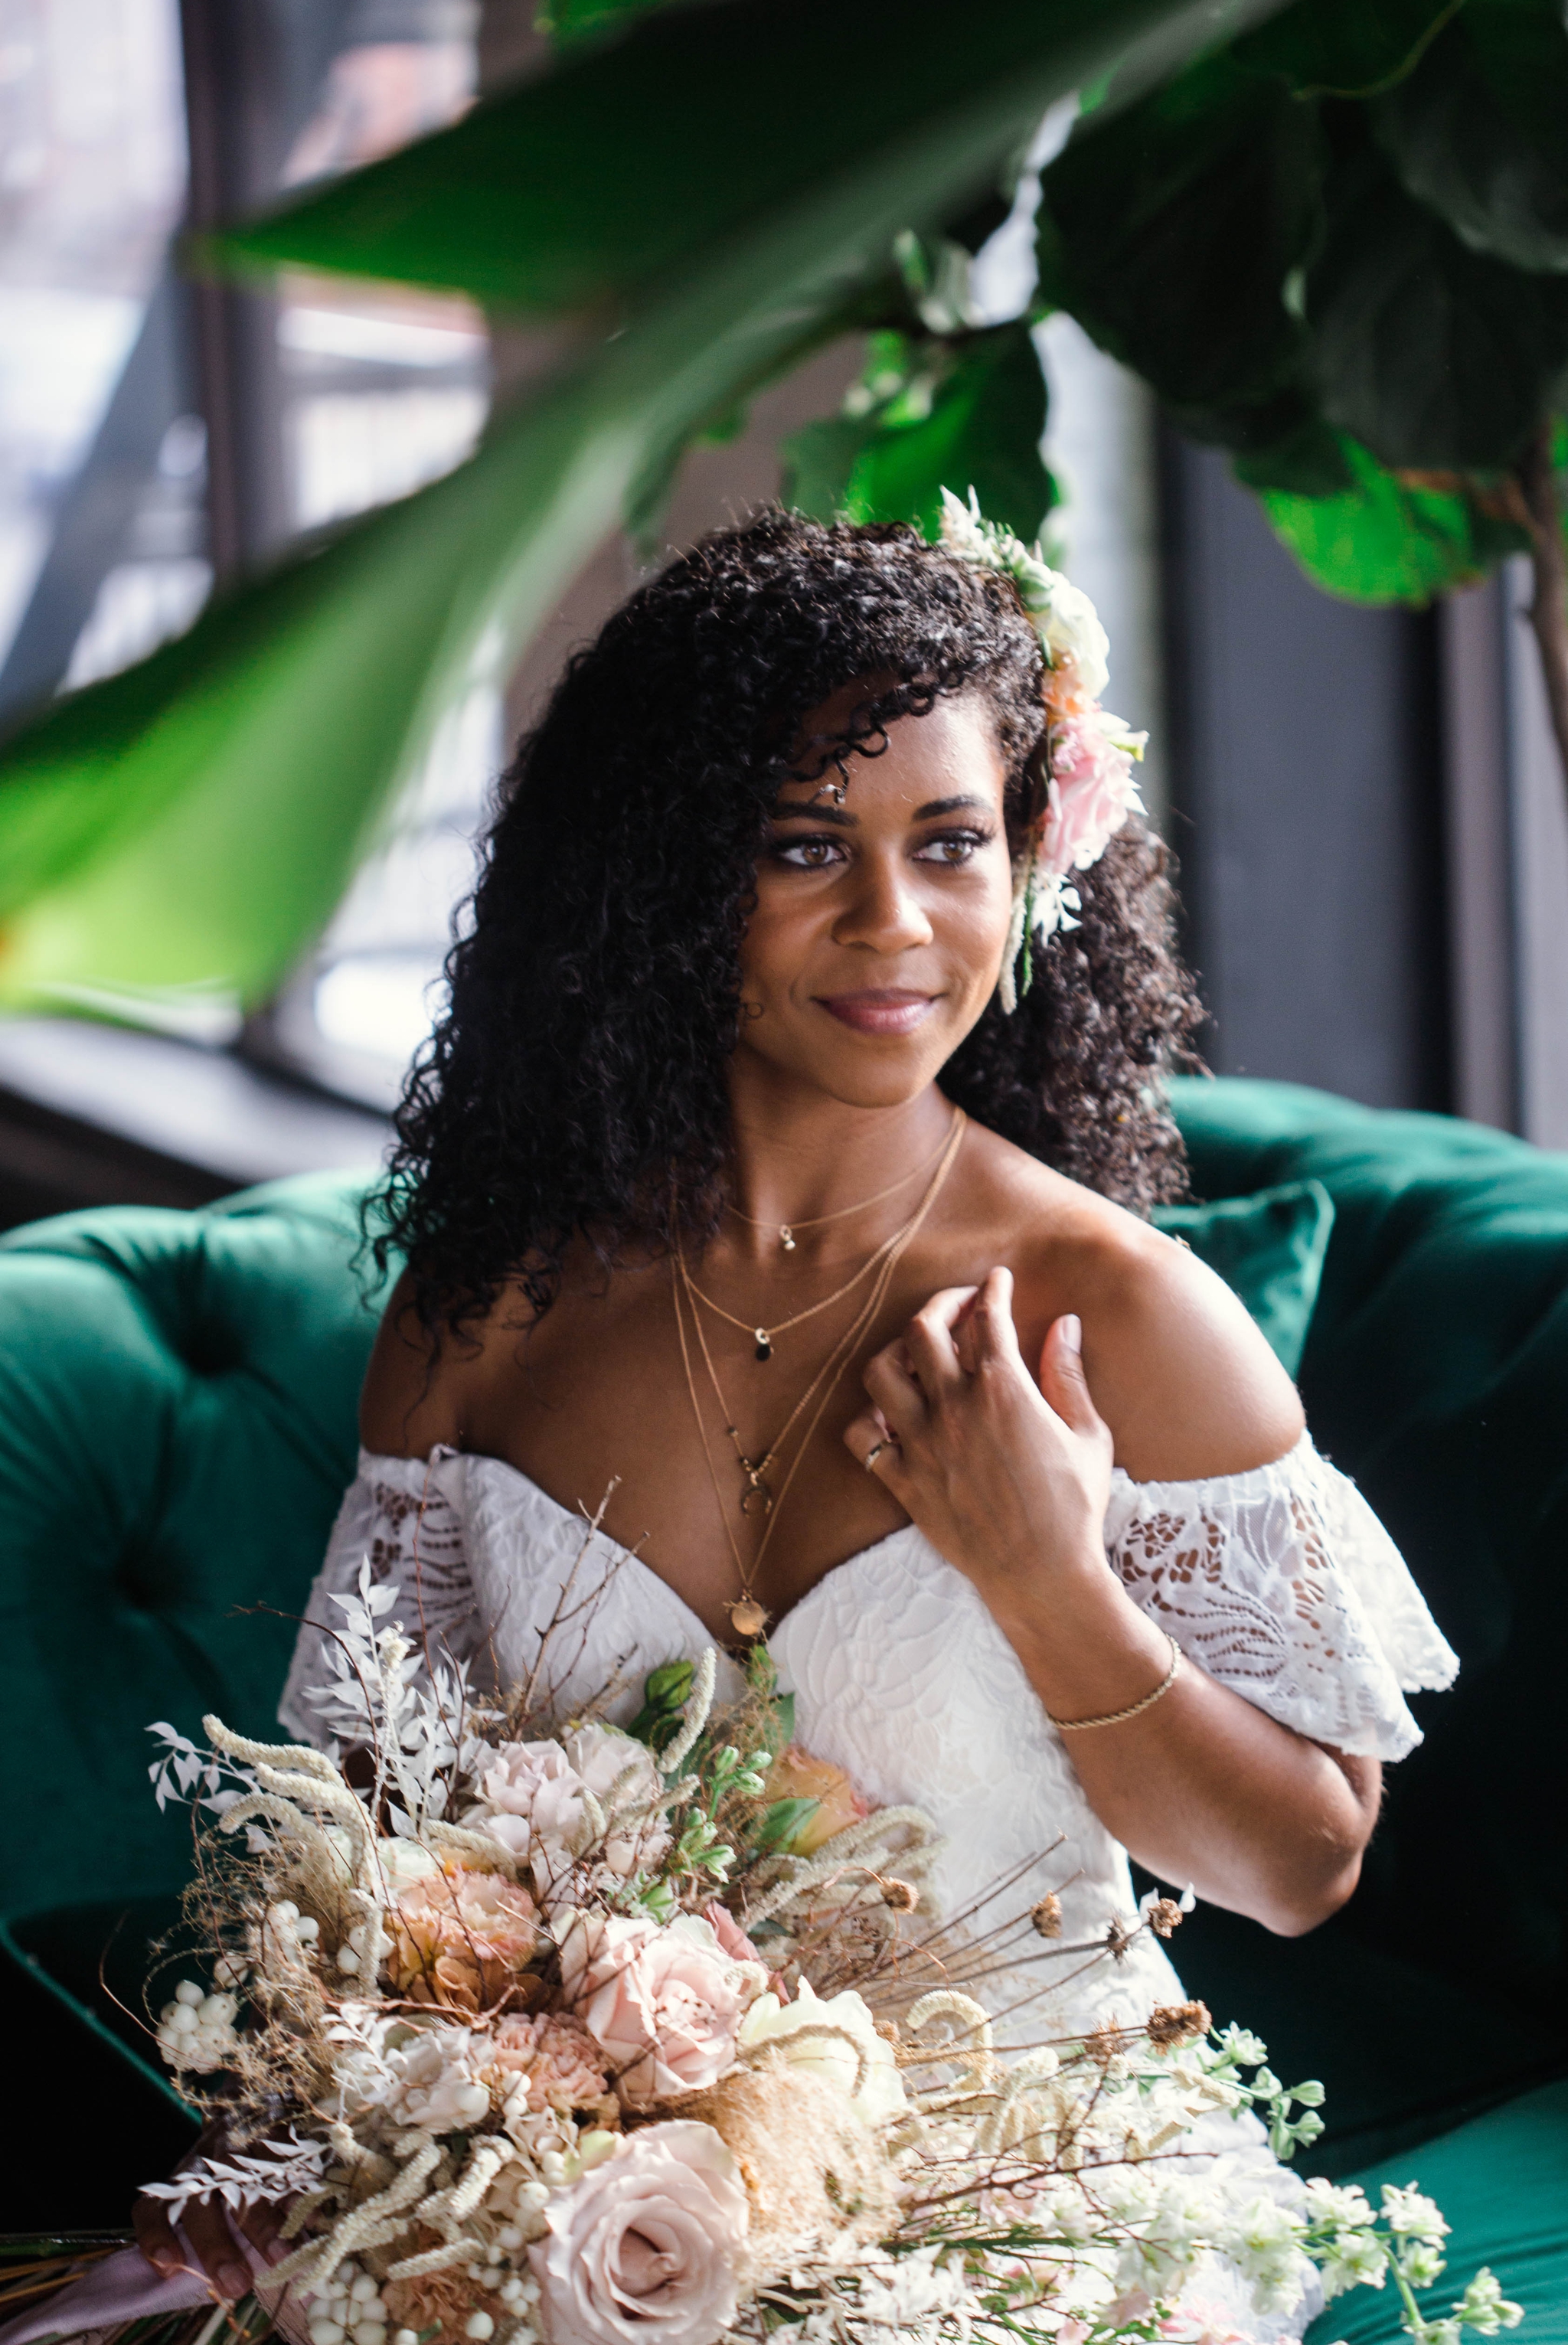  Indoor Natural light portrait of a black bride in a boho wedding dress sitting on an emerald tufted sofa - flowers in natural african american hair - oahu hawaii wedding photographer 